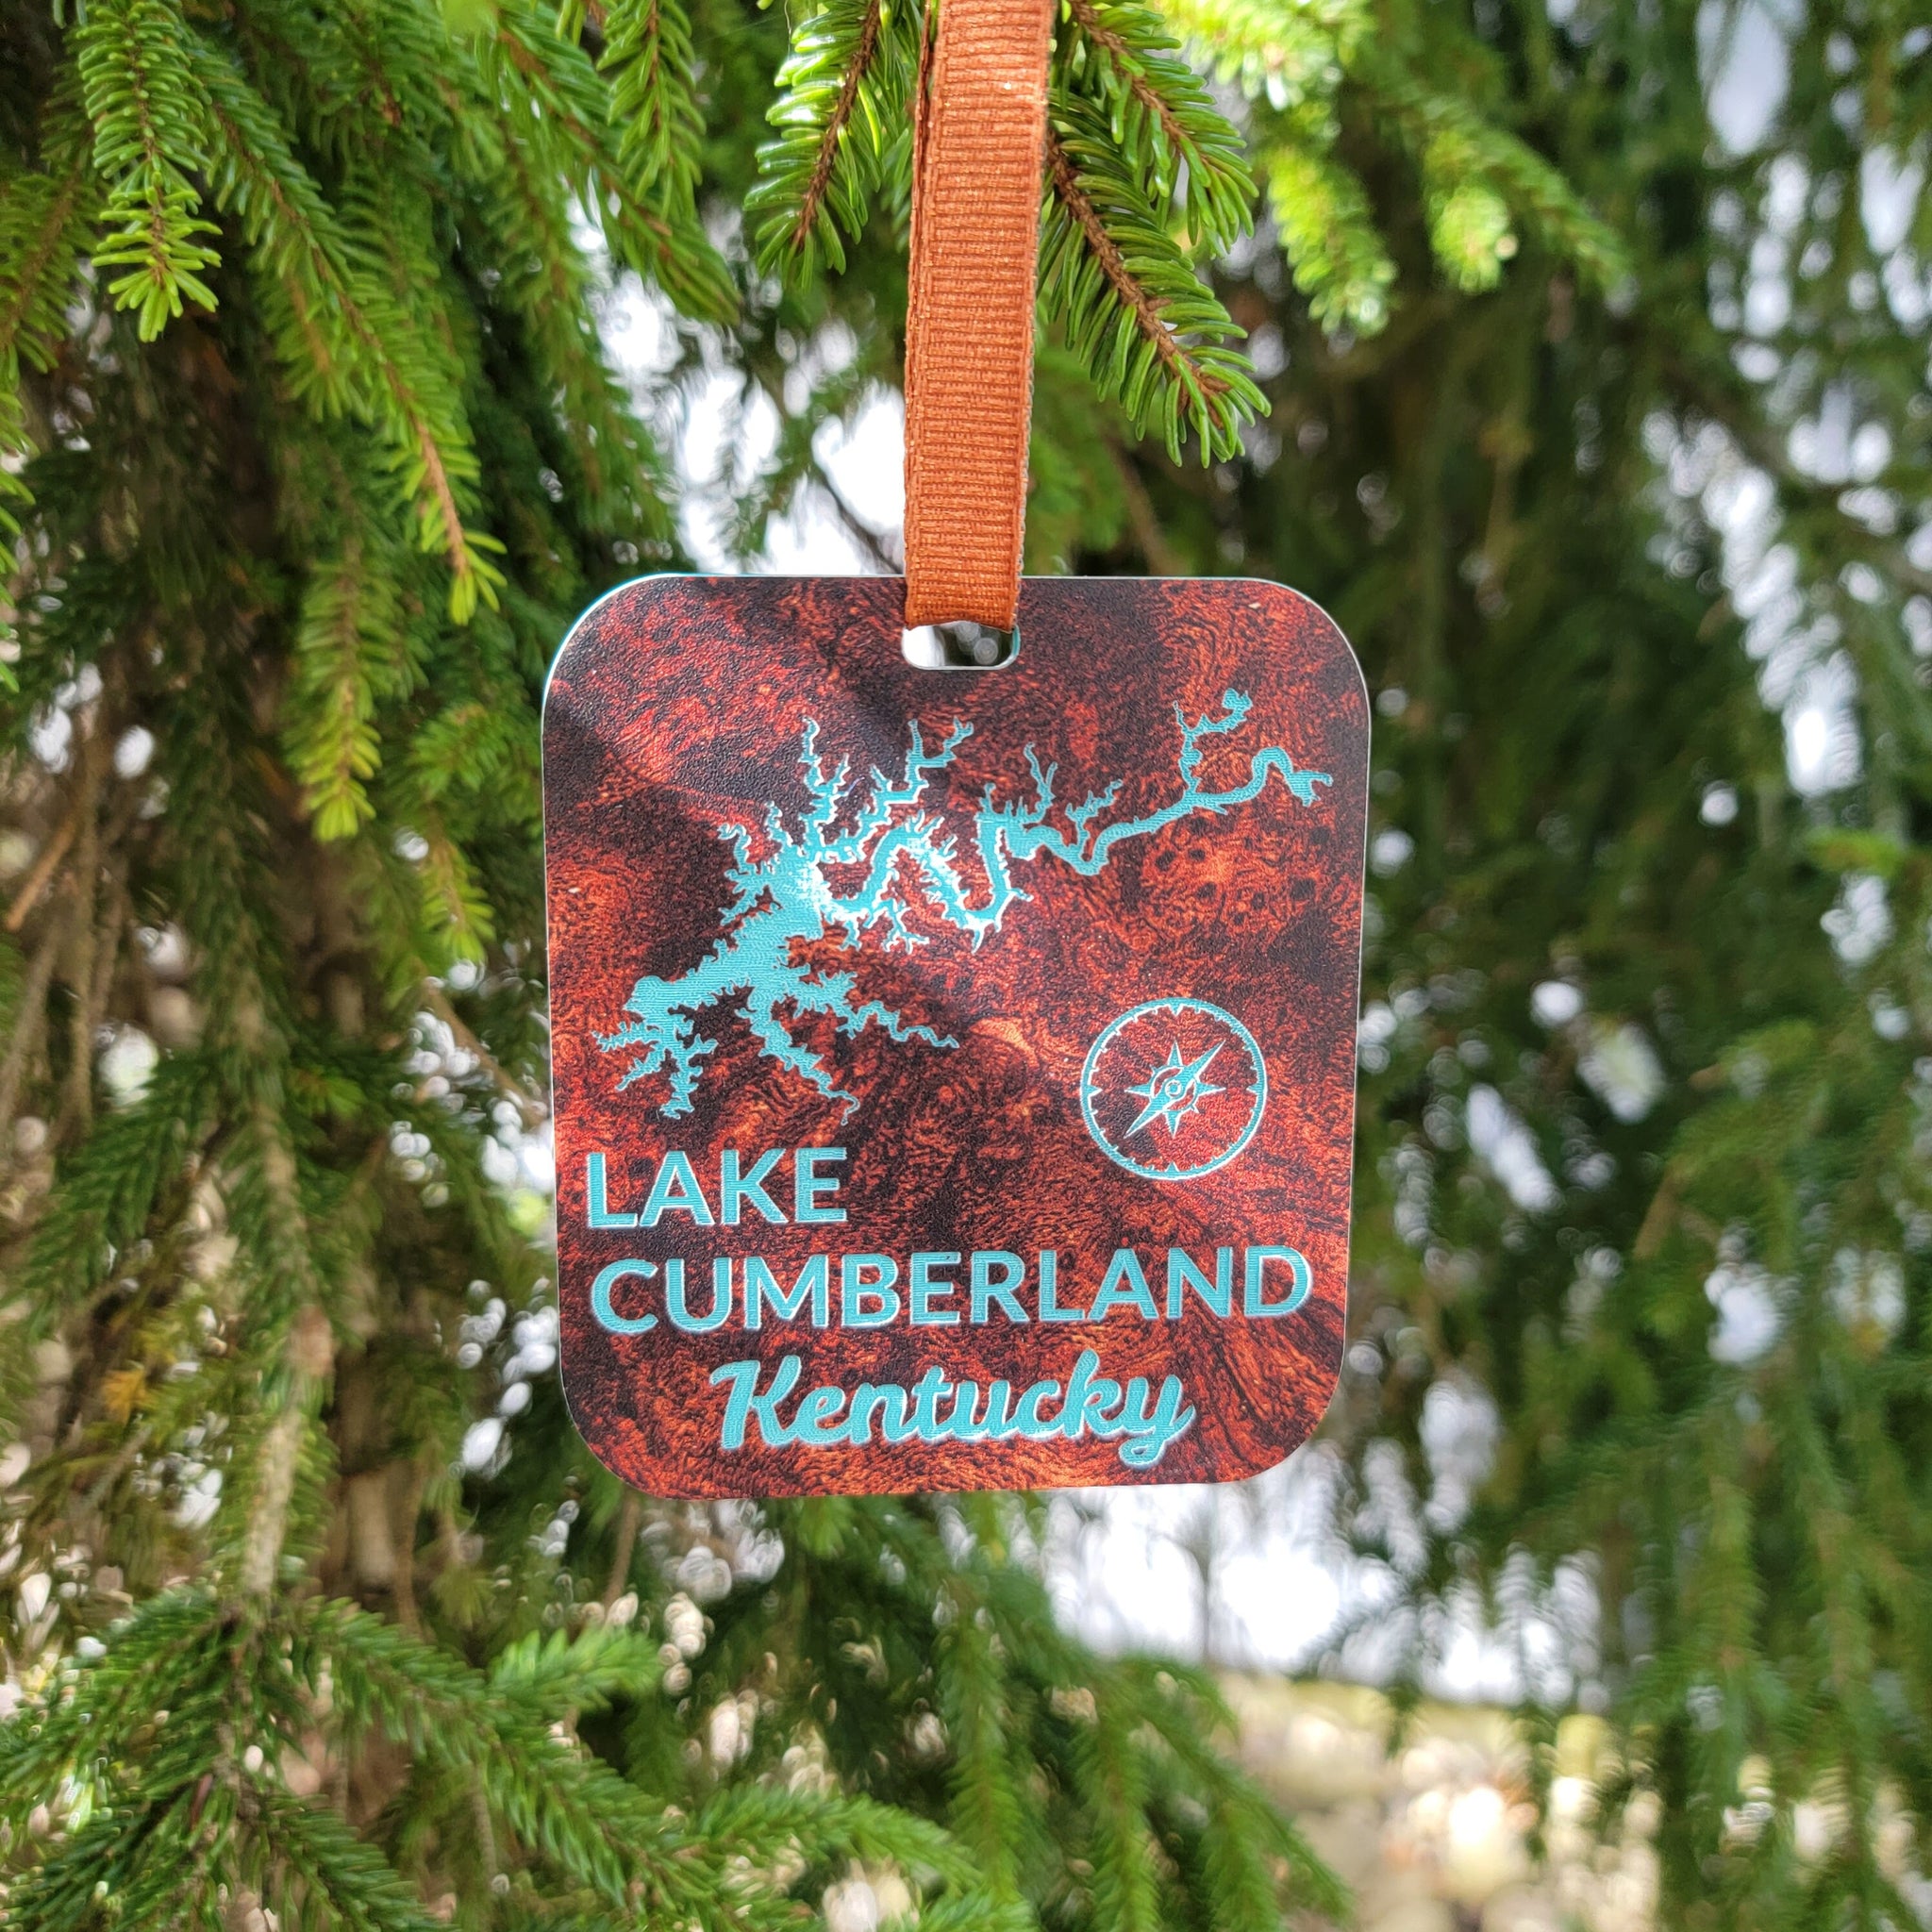 Lake Cumberland Kentucky Ornament 3.75" Acrylic Laser Cut Christmas Ornaments KY Made In USA Gift Laser Cut